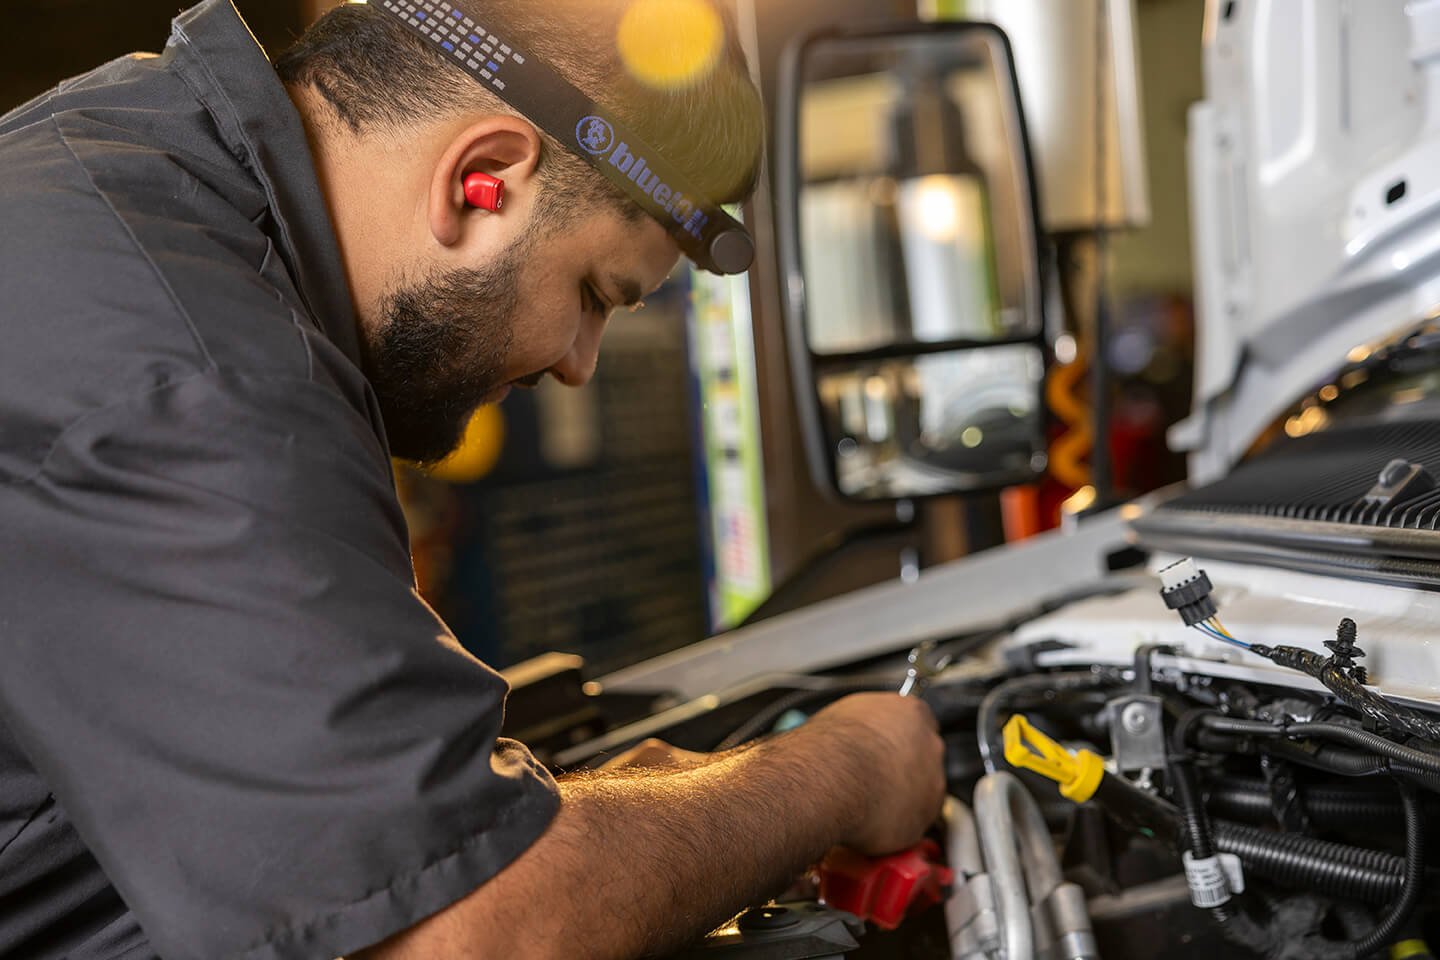 A mechanic working on the engine of a truck.